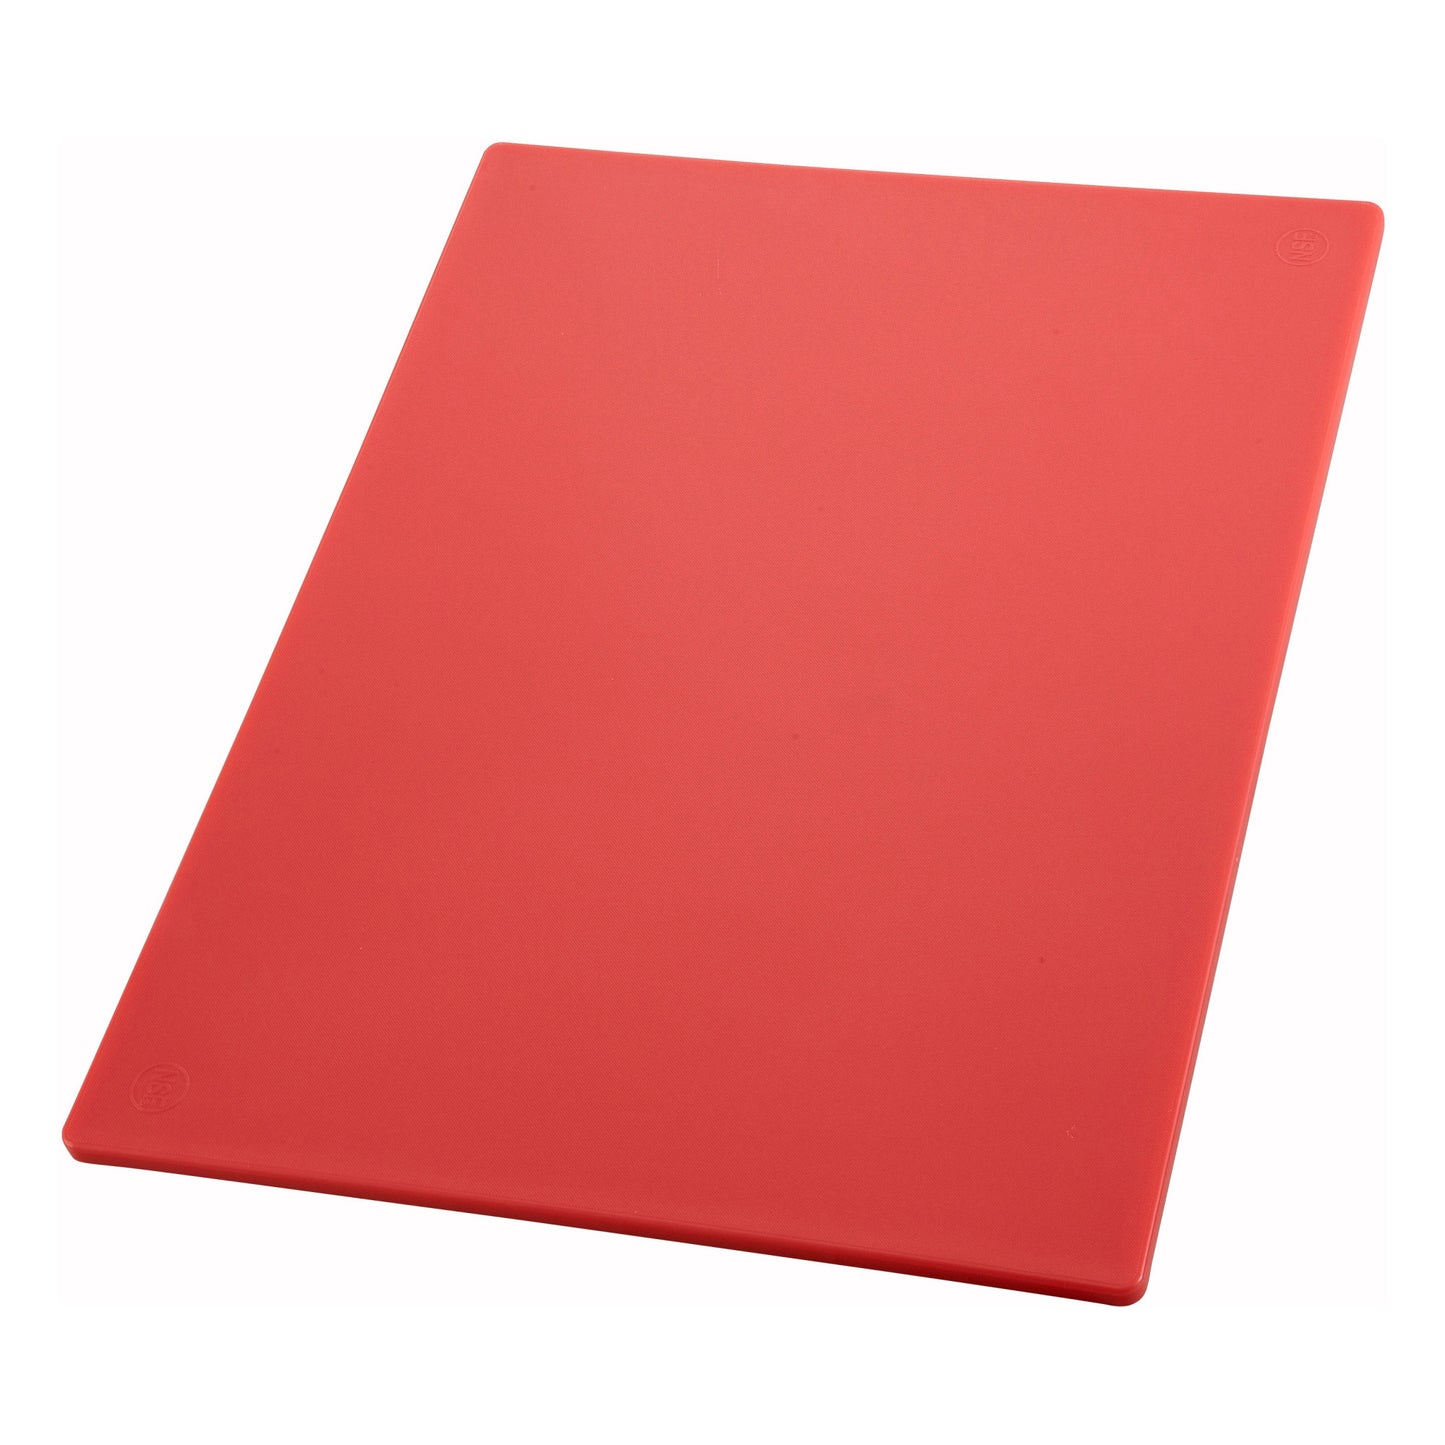 HACCP Color-Coded Cutting Board - 12 x 18, Red